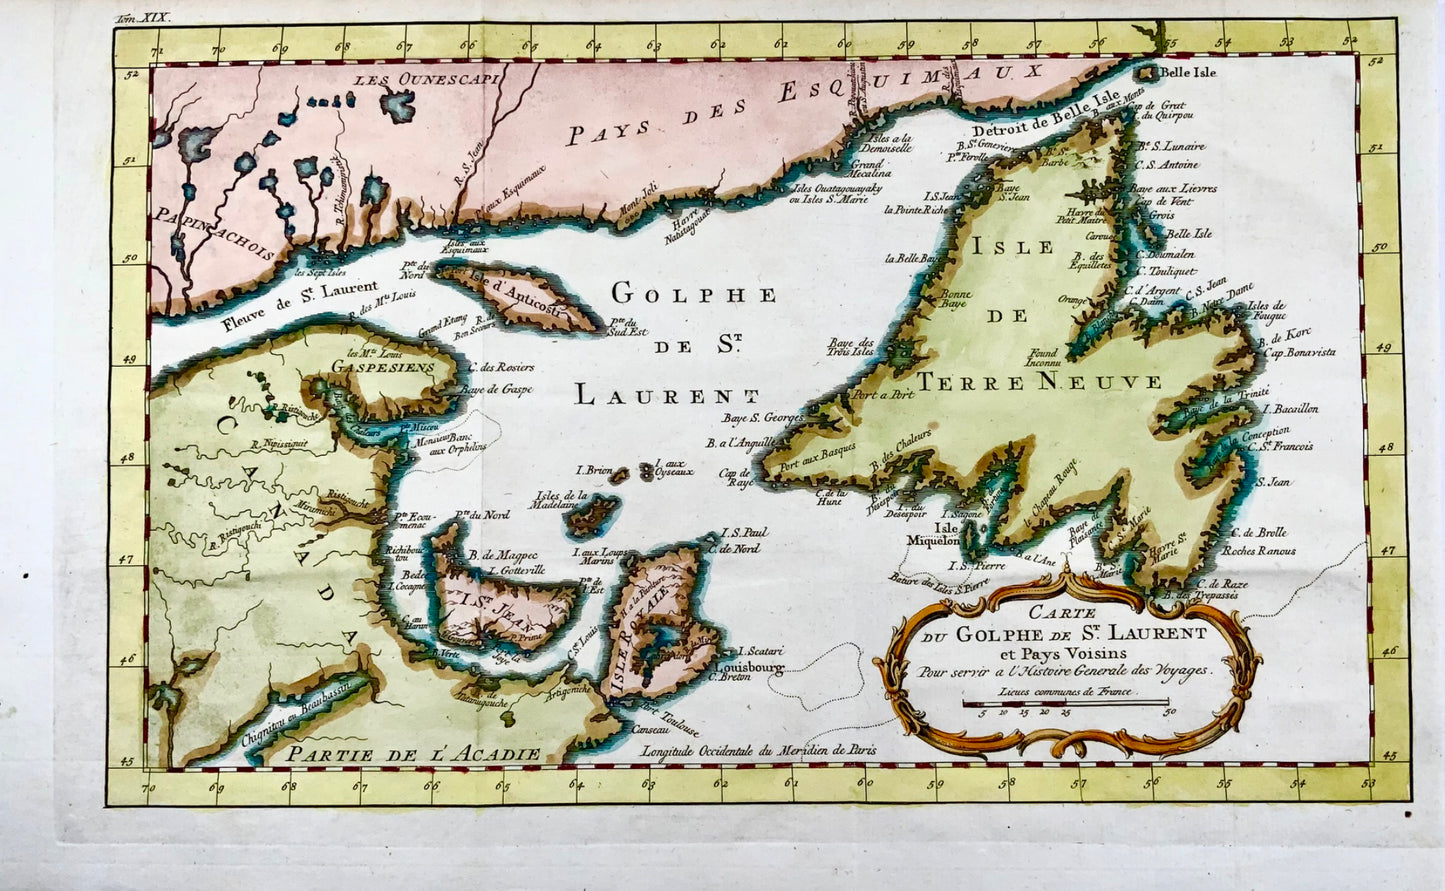 1767 Bellin, Canada, Gulf of Saint Lawrence, hand coloured engraving